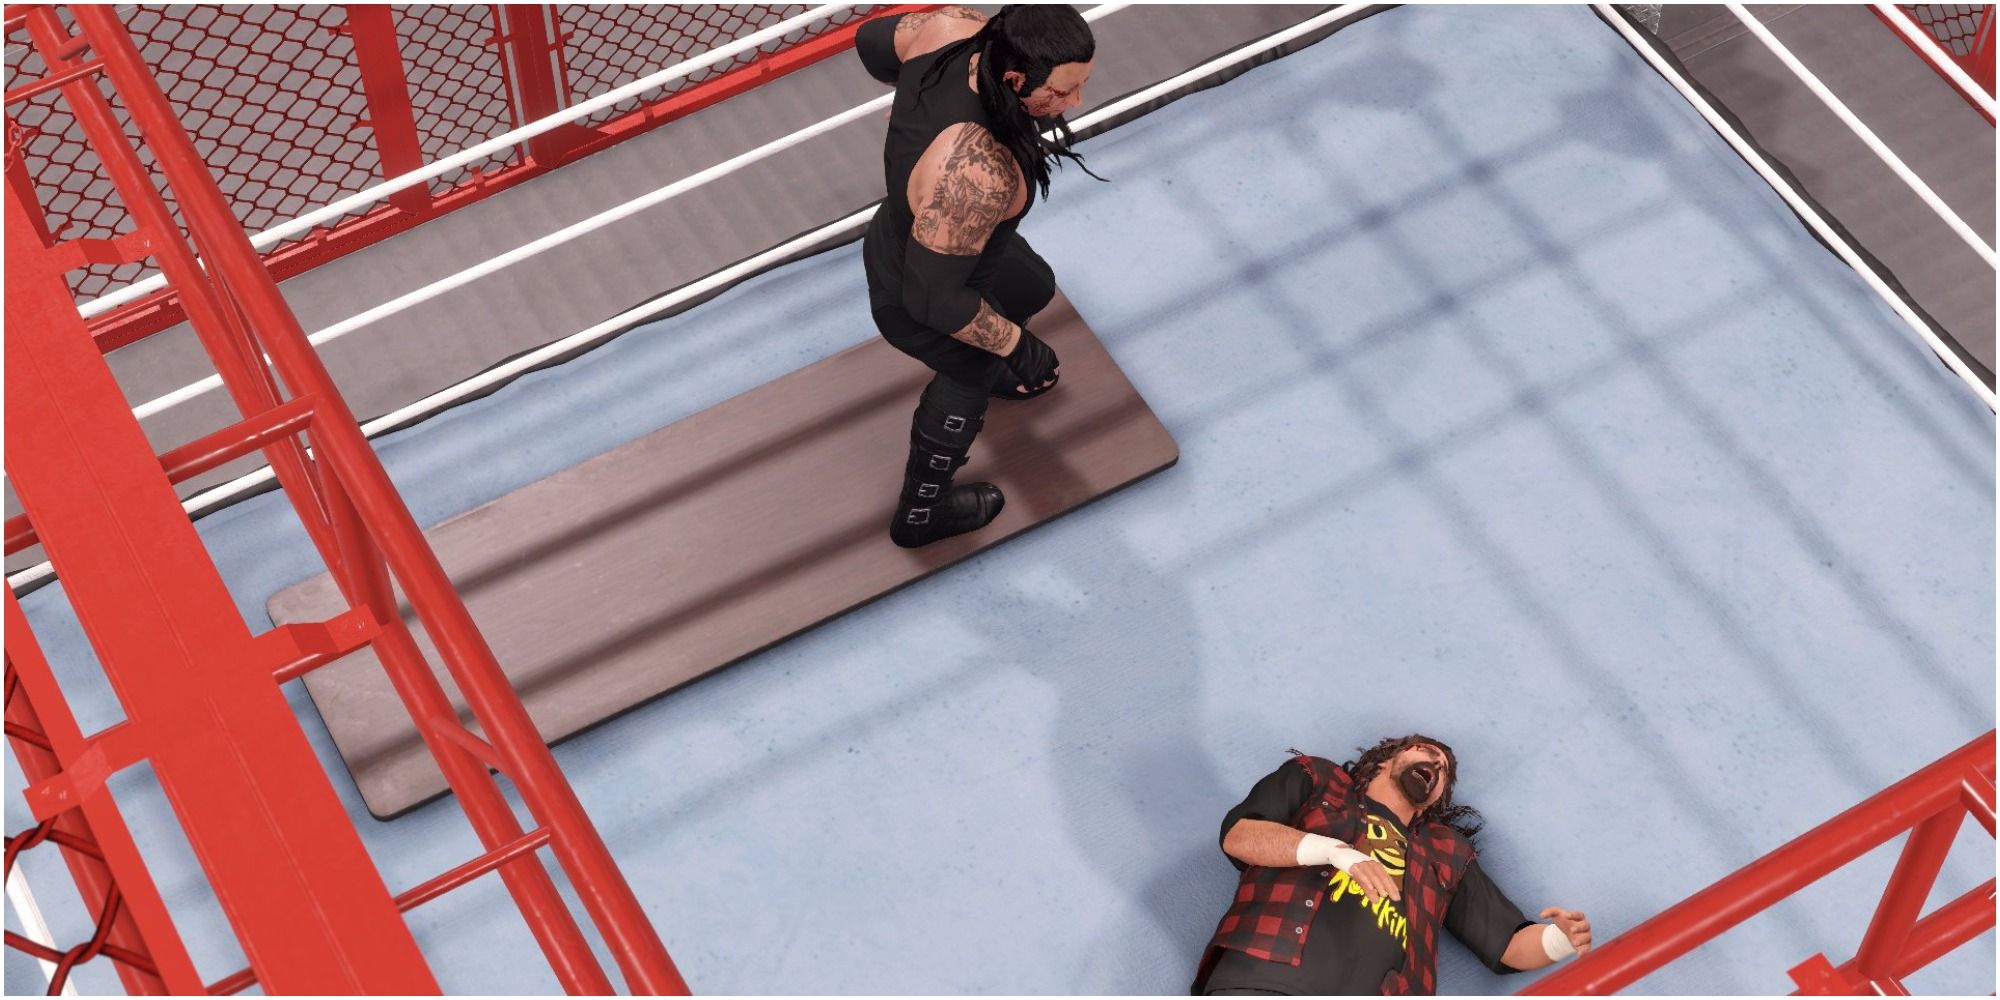 WWE 2K22 Foley fell through the cage roof